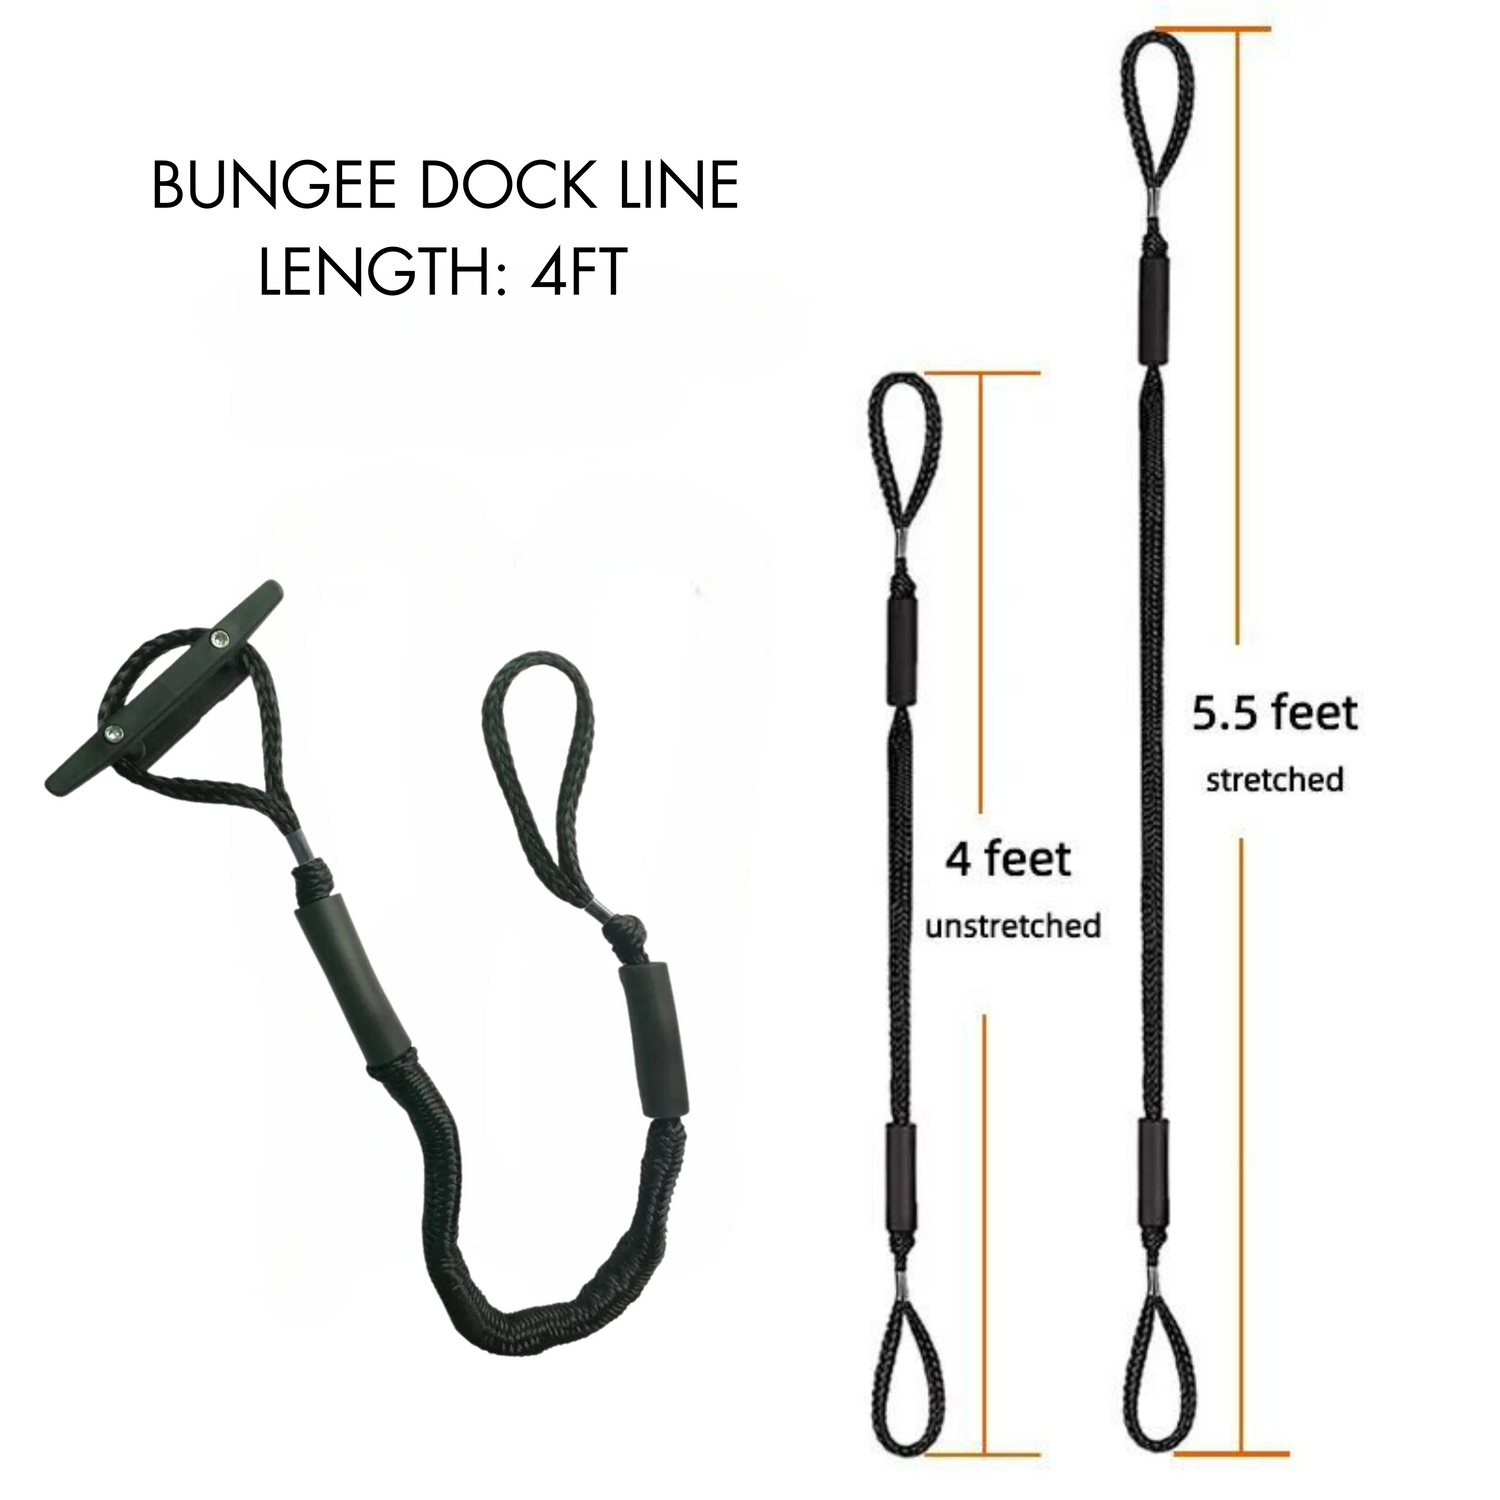 Bungee Dock Line (No Clips)